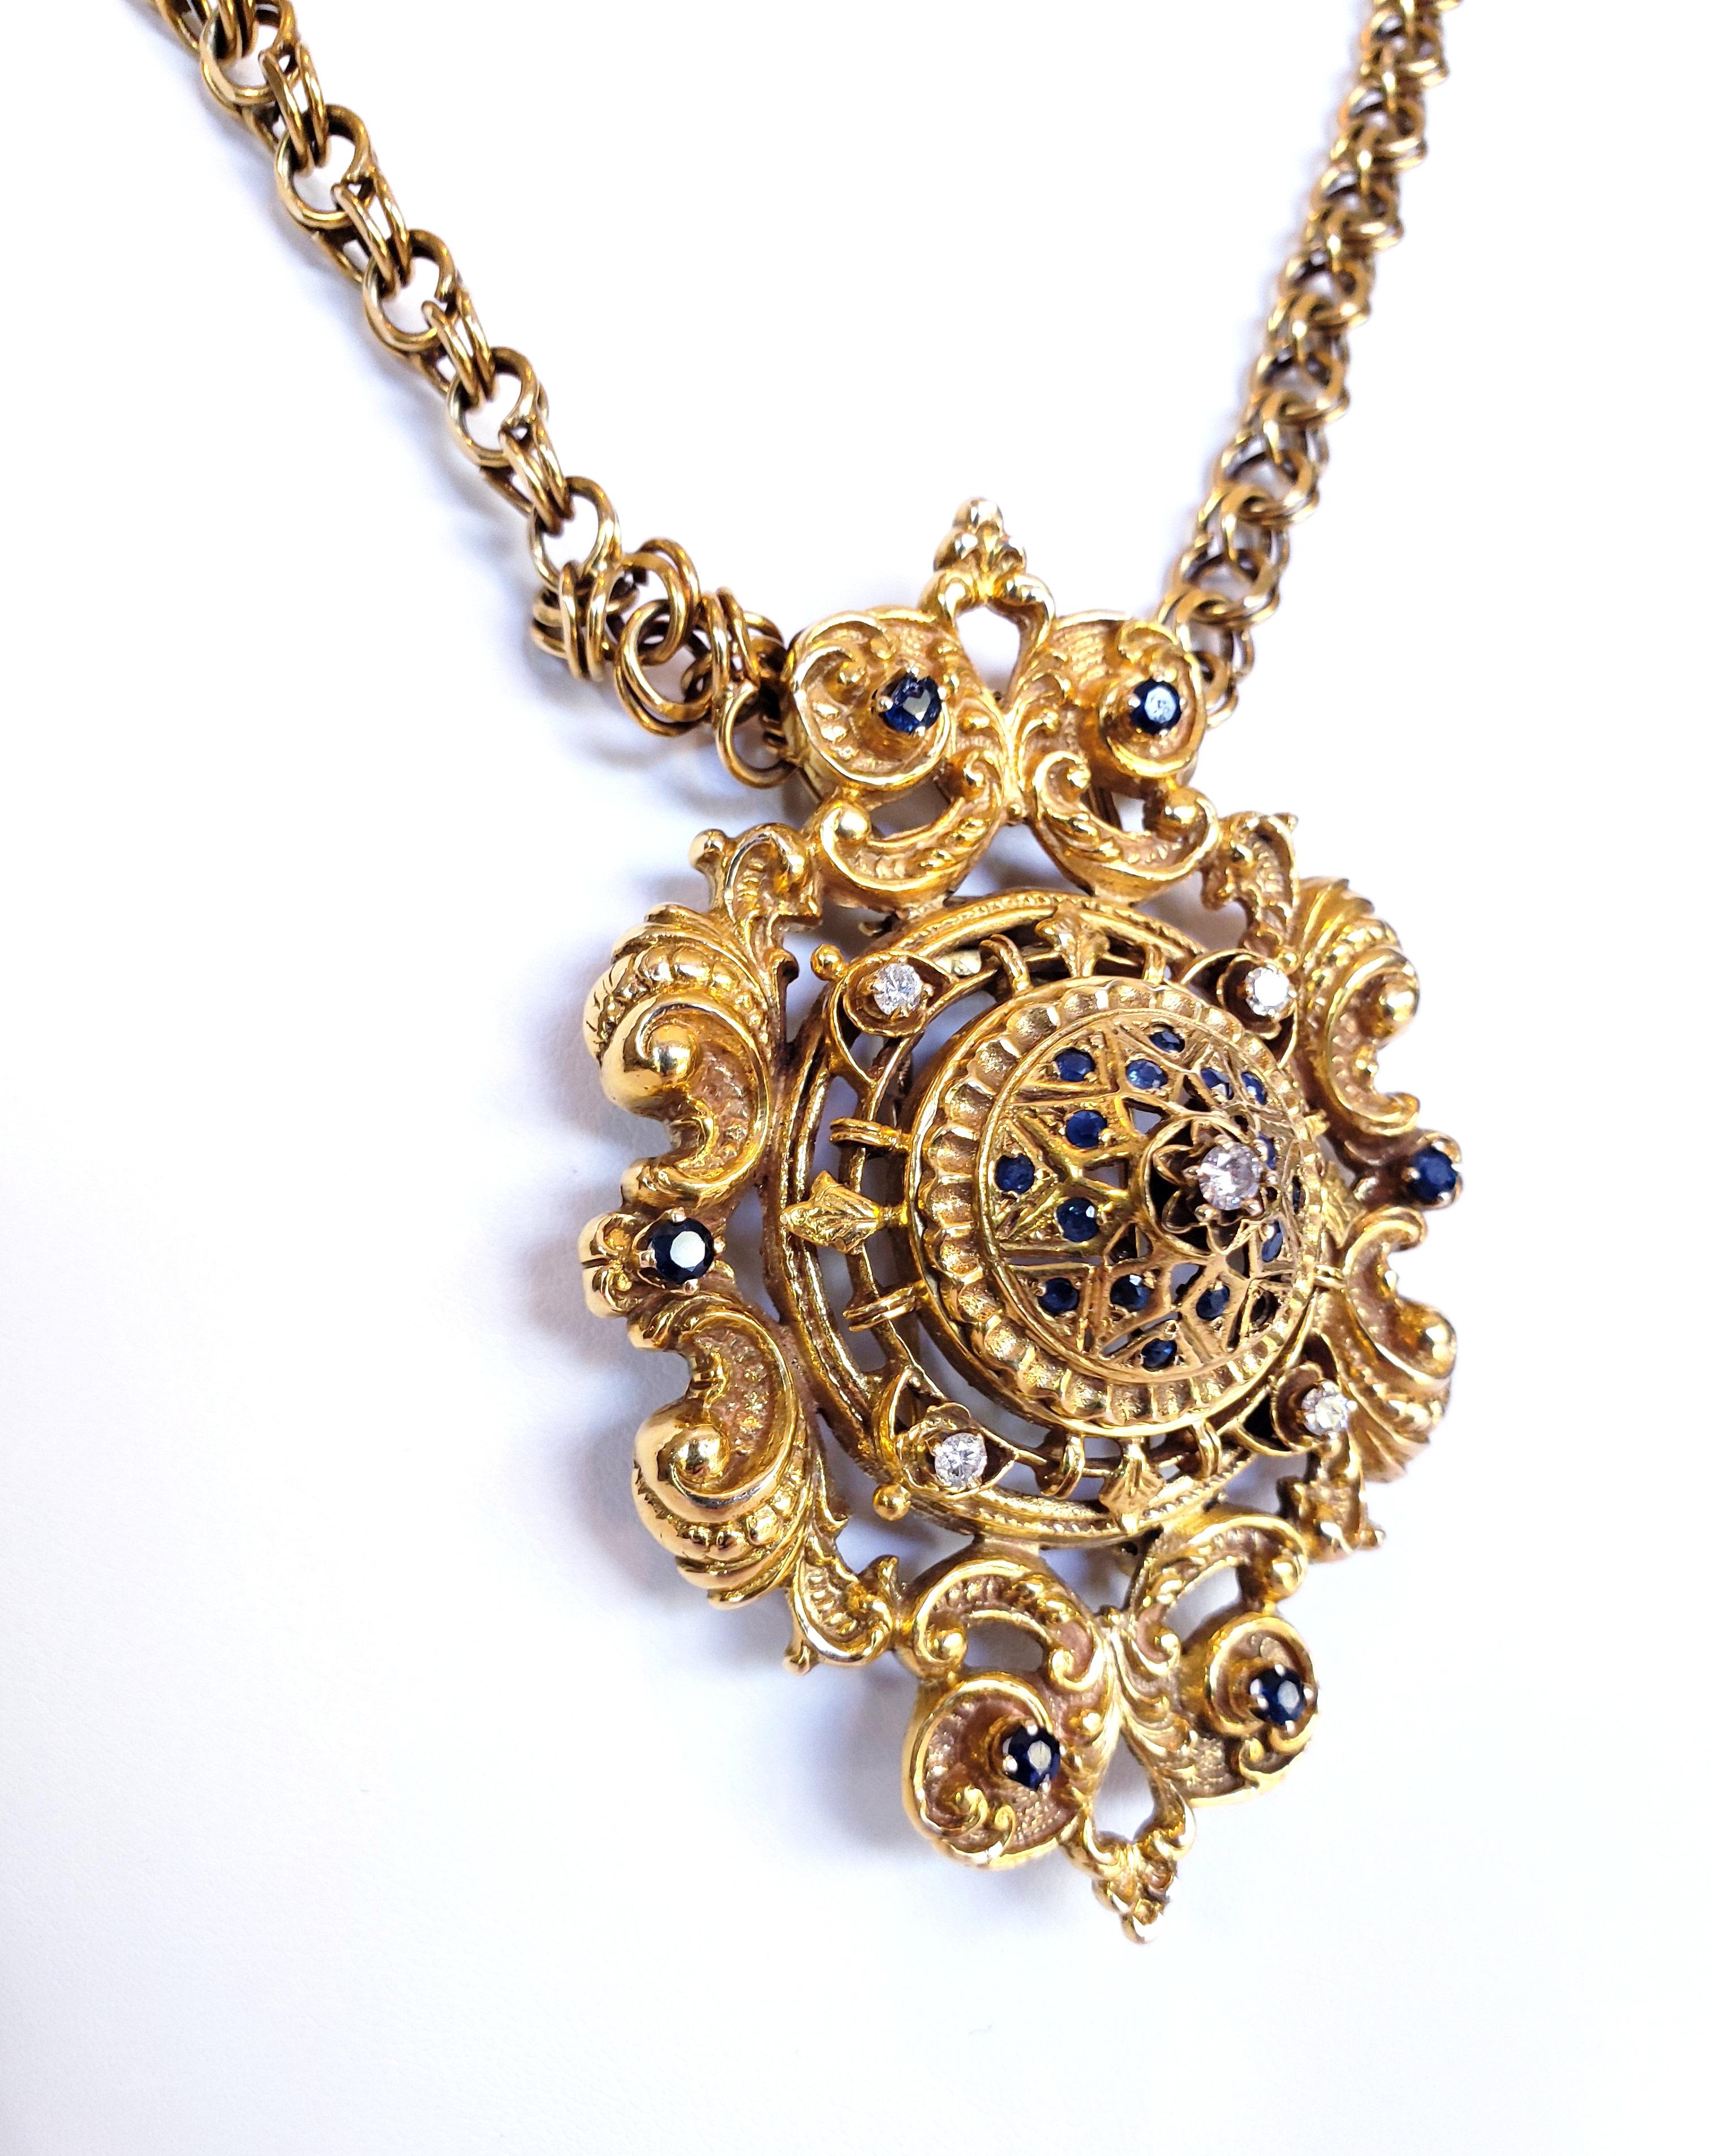 14 Karat Gold Necklace with Highly Stylized Diamond and Sapphire Pendant/Brooch In Excellent Condition For Sale In West Hollywood, CA